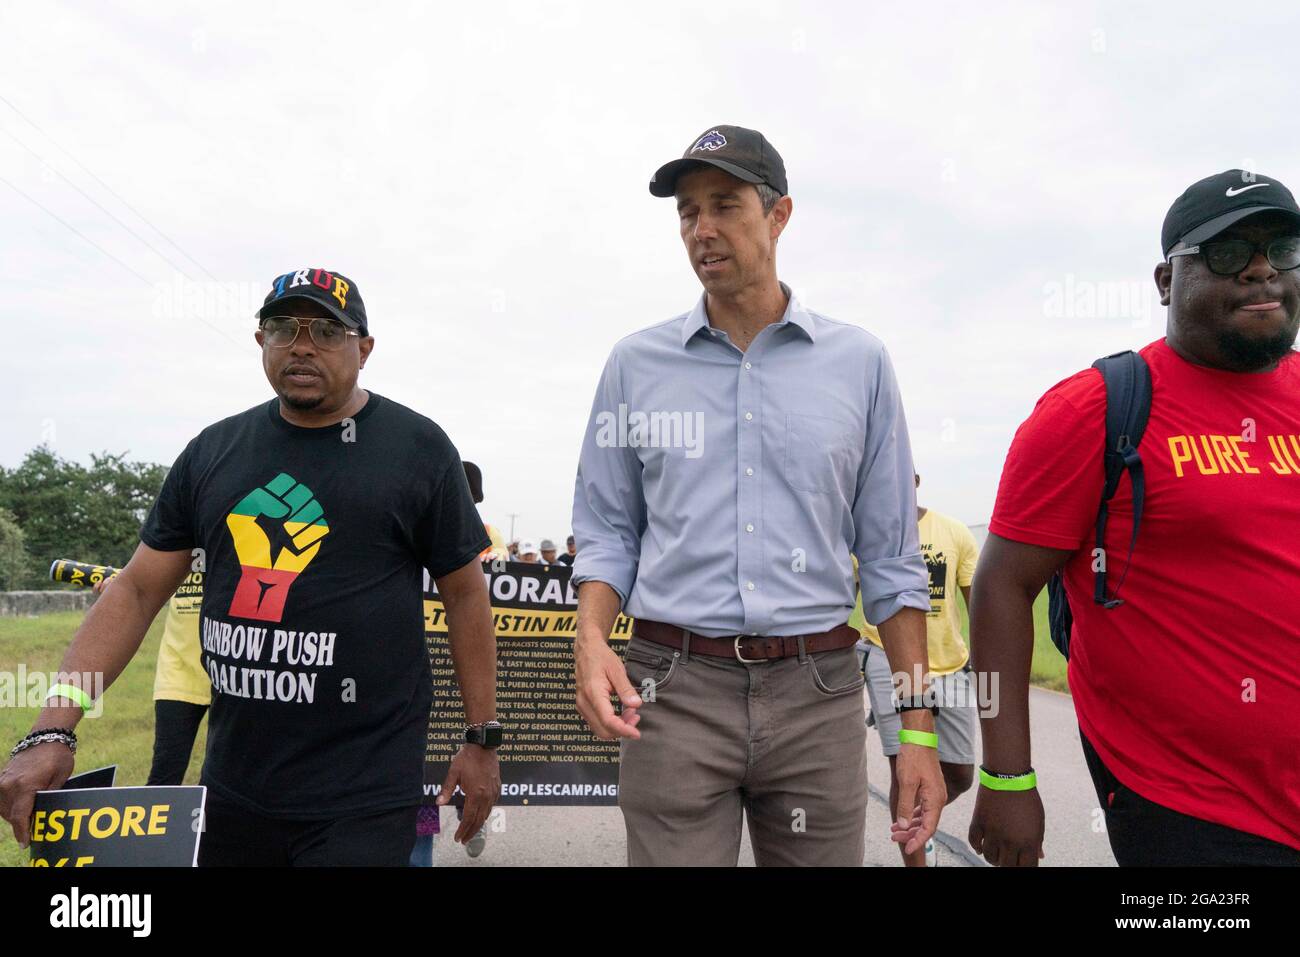 Georgetown, United States. 28th July, 2021. Former congressman and current Democratic activist BETO O'ROURKE (in blue shirt) leads voting rights advocates as they start a 30 mile, four-day march from Georgetown, Texas to the State Capitol in Austin. Due to summer Texas heat, several 100-person shifts will trade off marching about 4 miles each. Credit: Bob Daemmrich/Alamy Live News Stock Photo